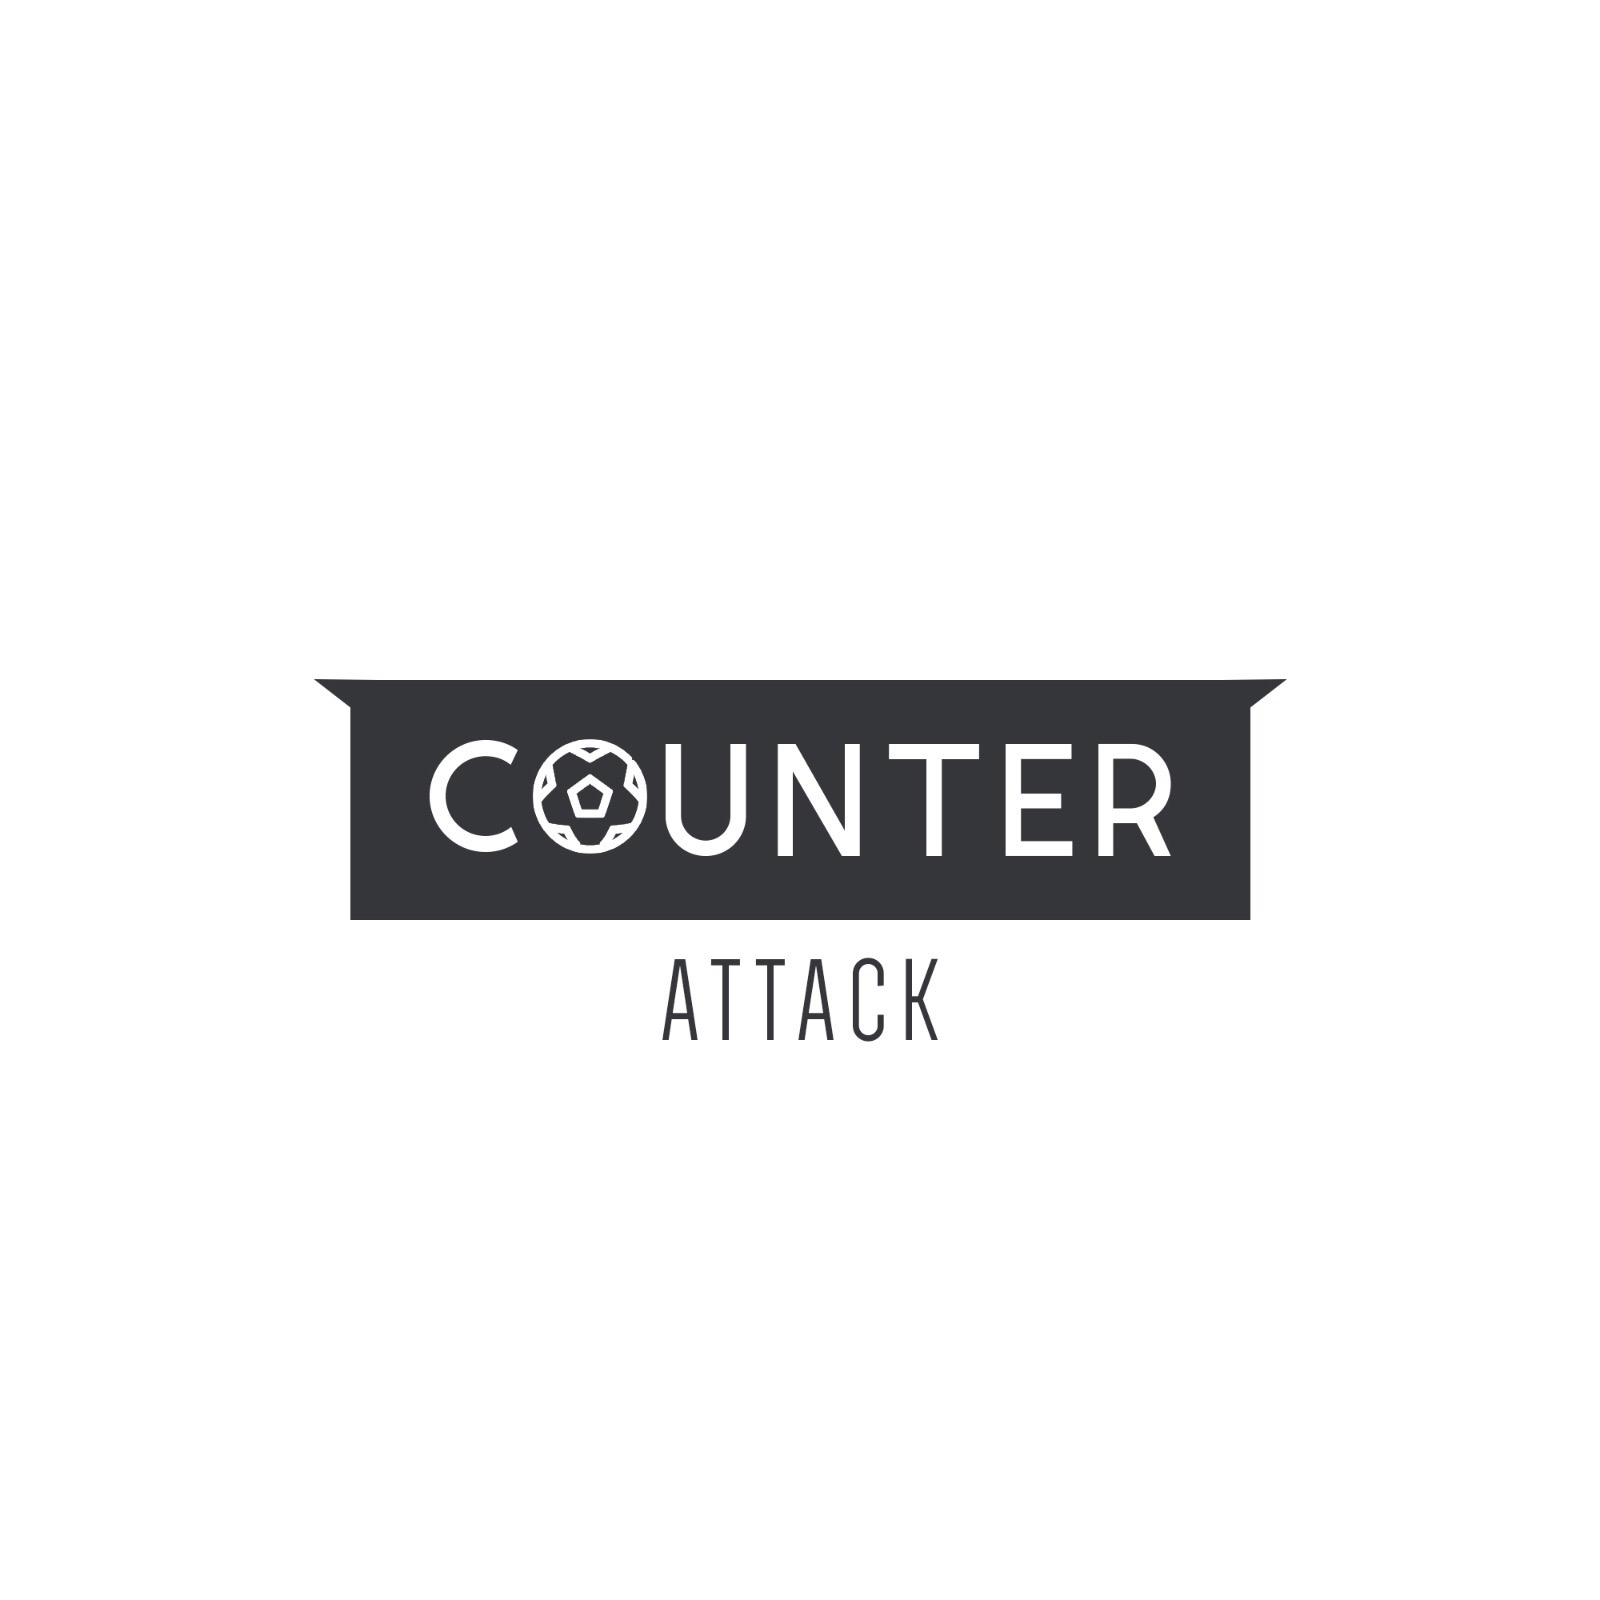 Counter Attack - Episode 101 - Atletico Masterclass or Liverpool Wasteful?